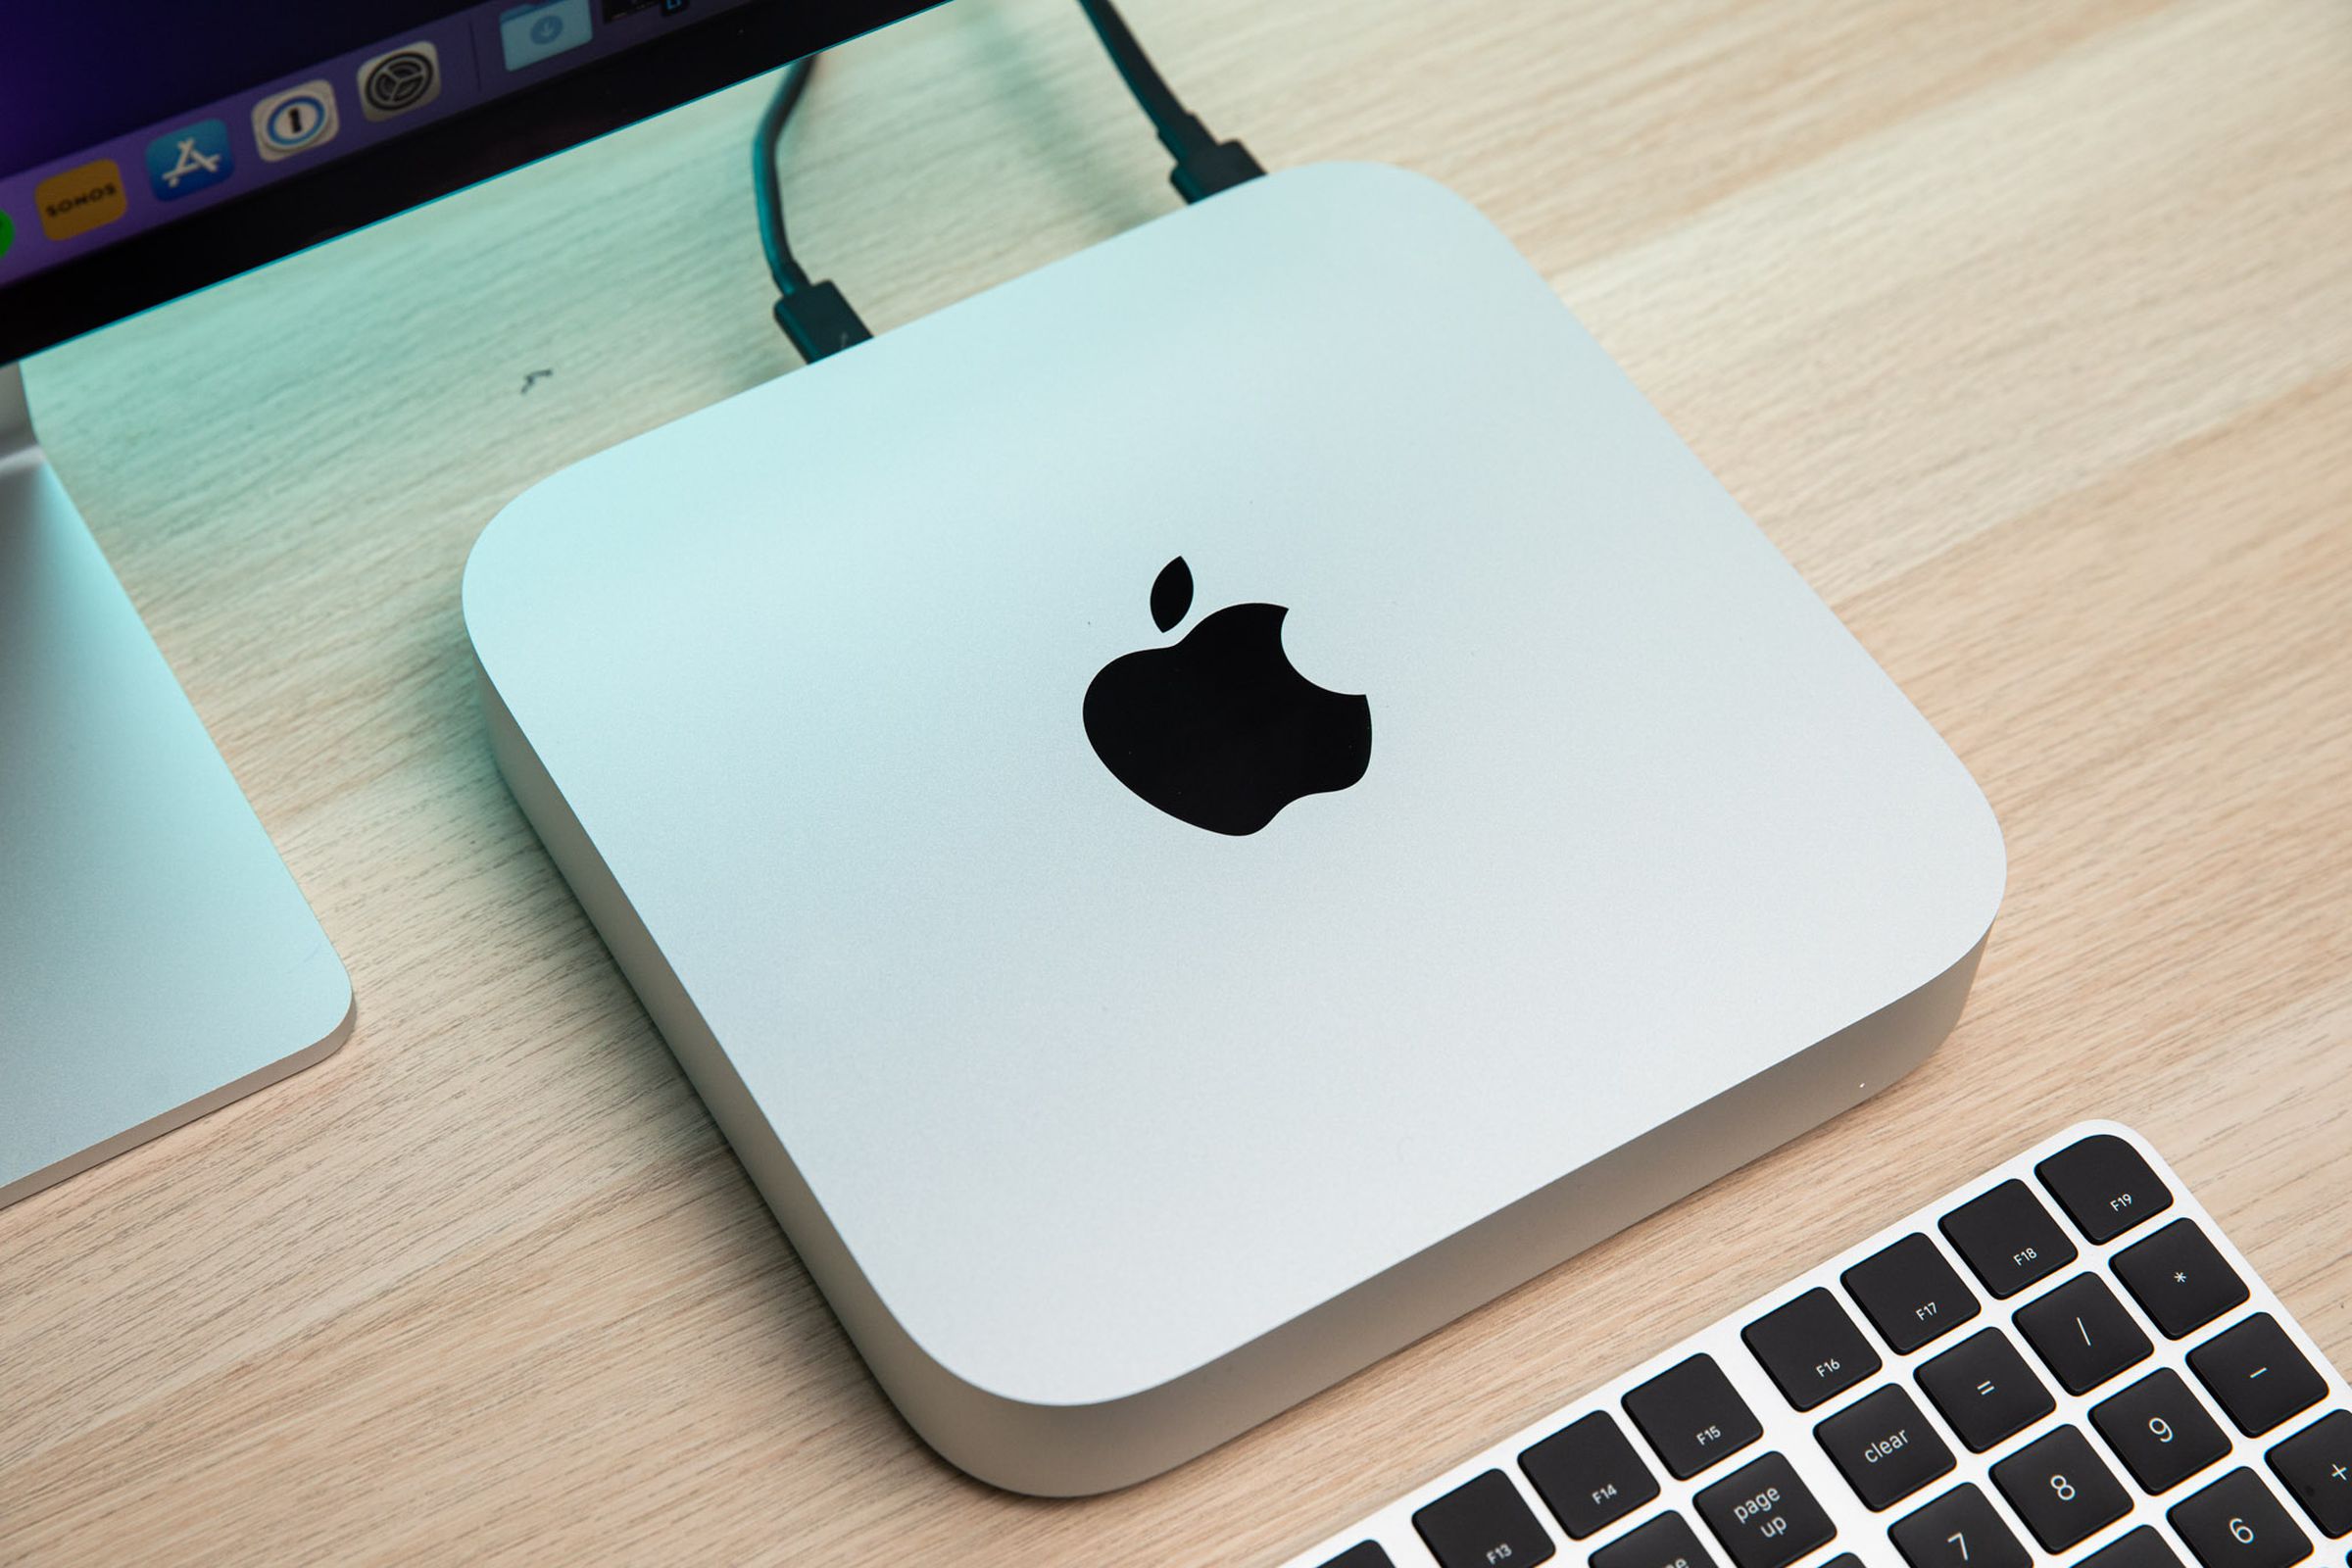 The Mac Mini sitting on a wood table underneath a monitor and beside a keyboard.